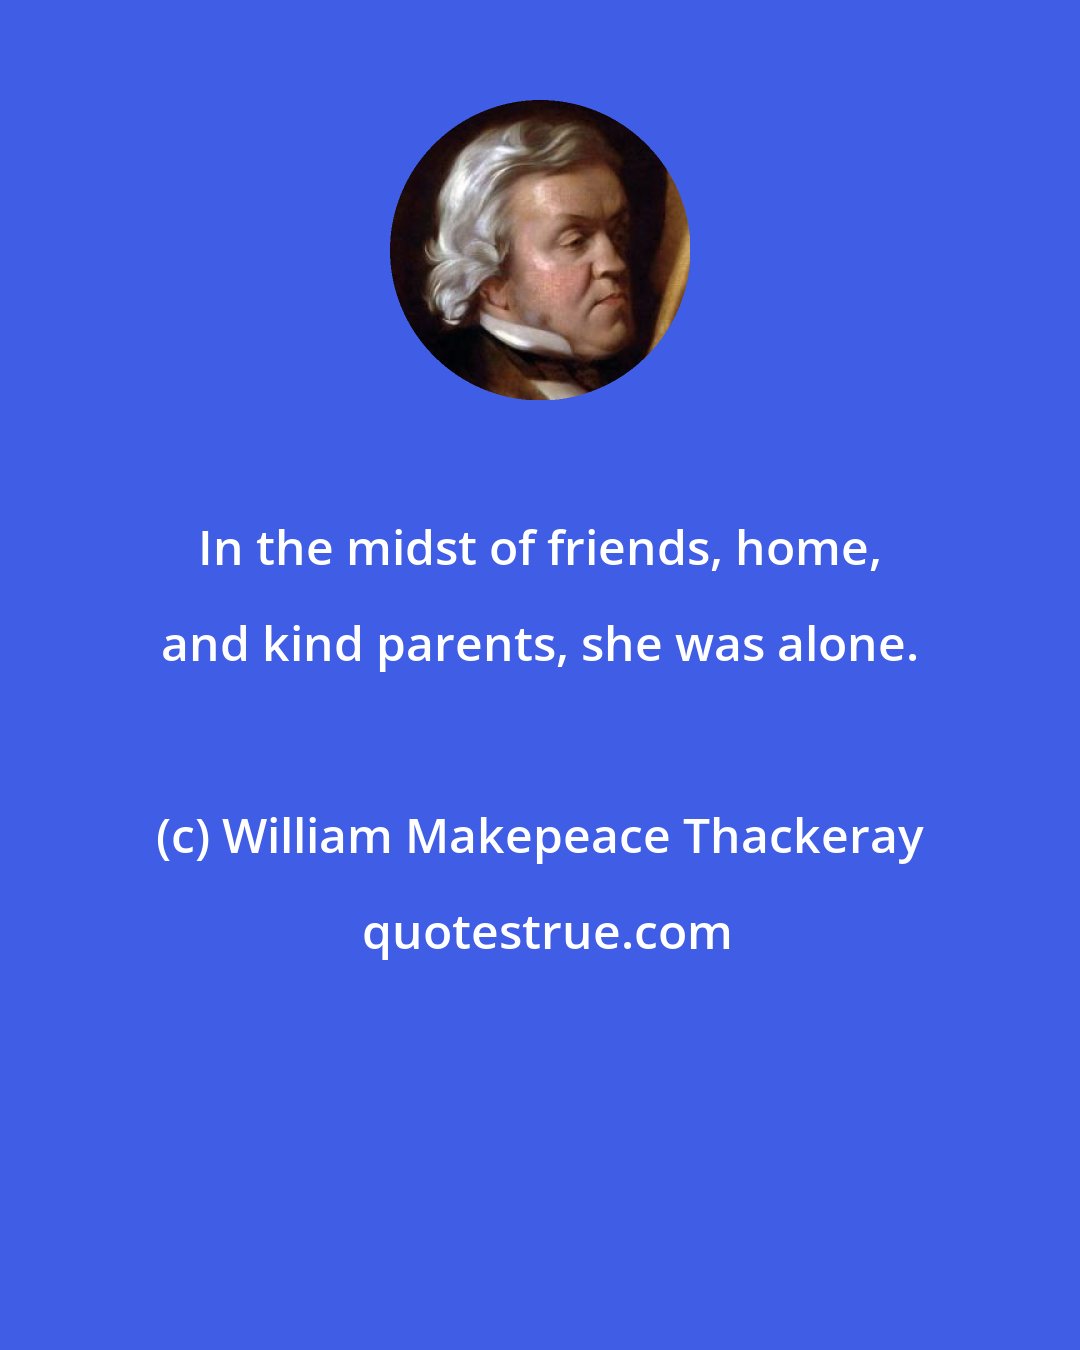 William Makepeace Thackeray: In the midst of friends, home, and kind parents, she was alone.